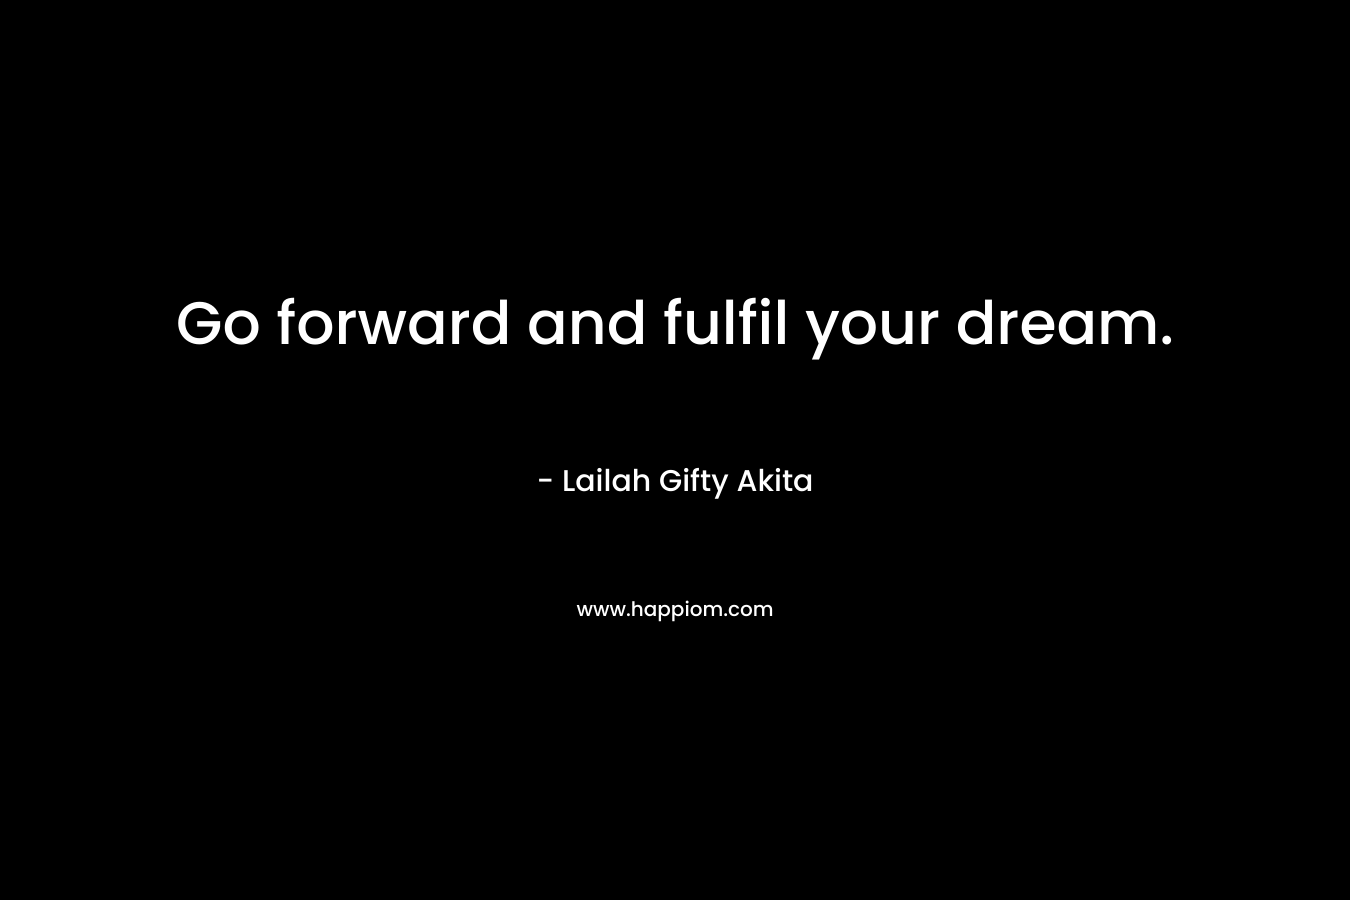 Go forward and fulfil your dream.